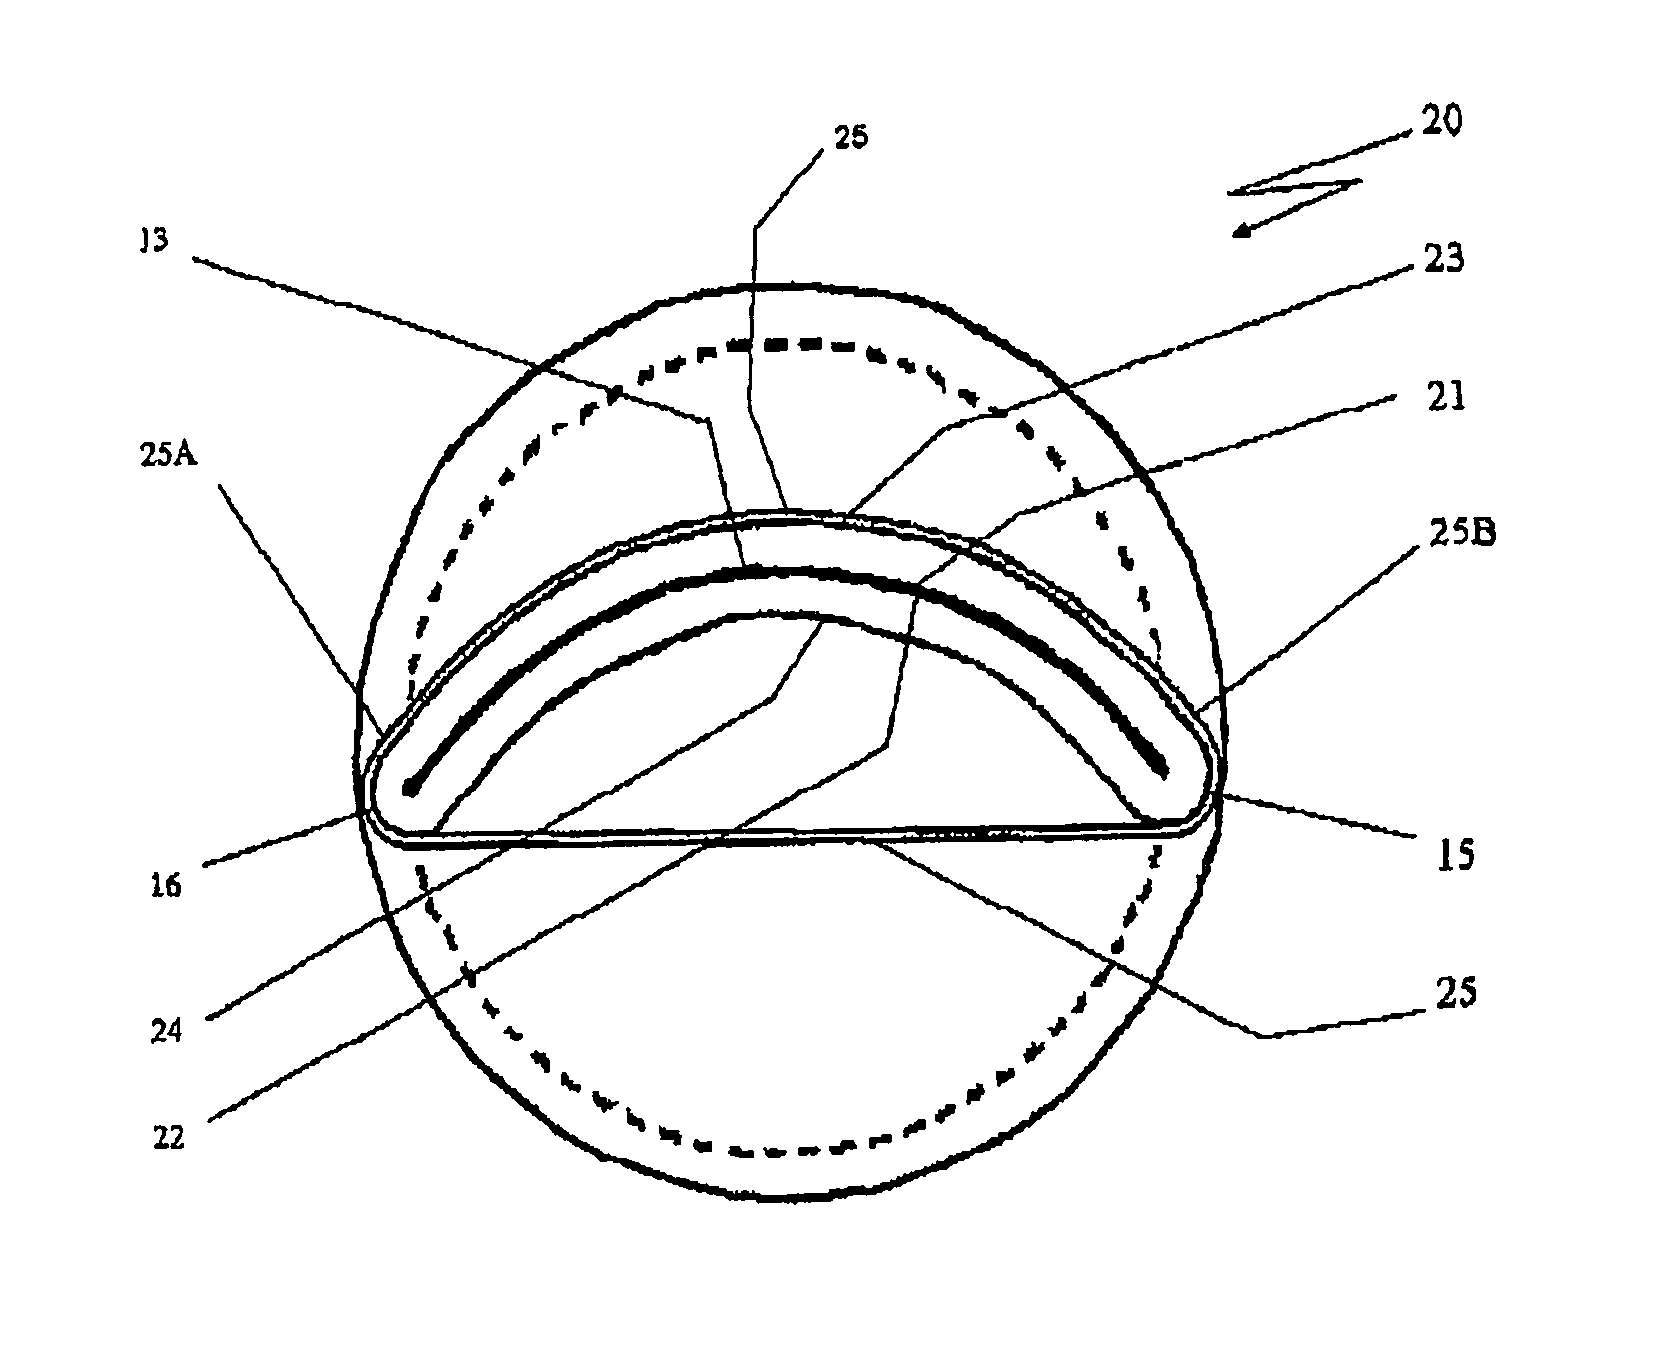 Duckbill type check valve with curved and resiliently biased closing seal